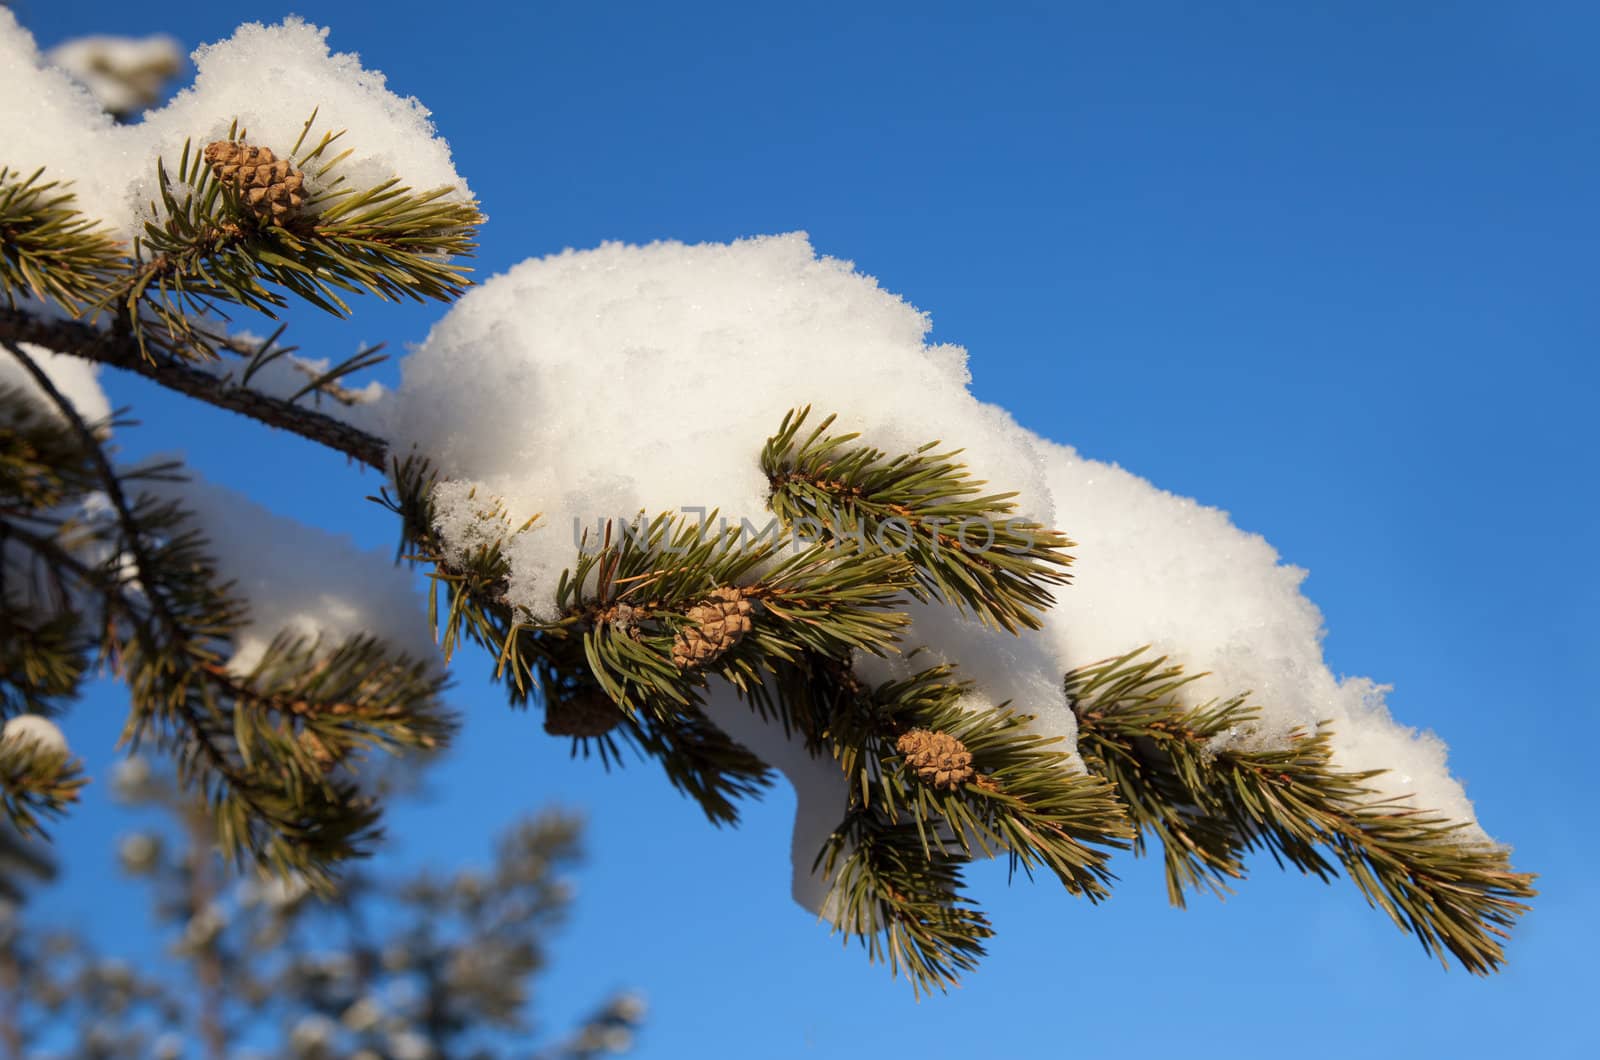 Pine branch with cones in the snow against the blue sky